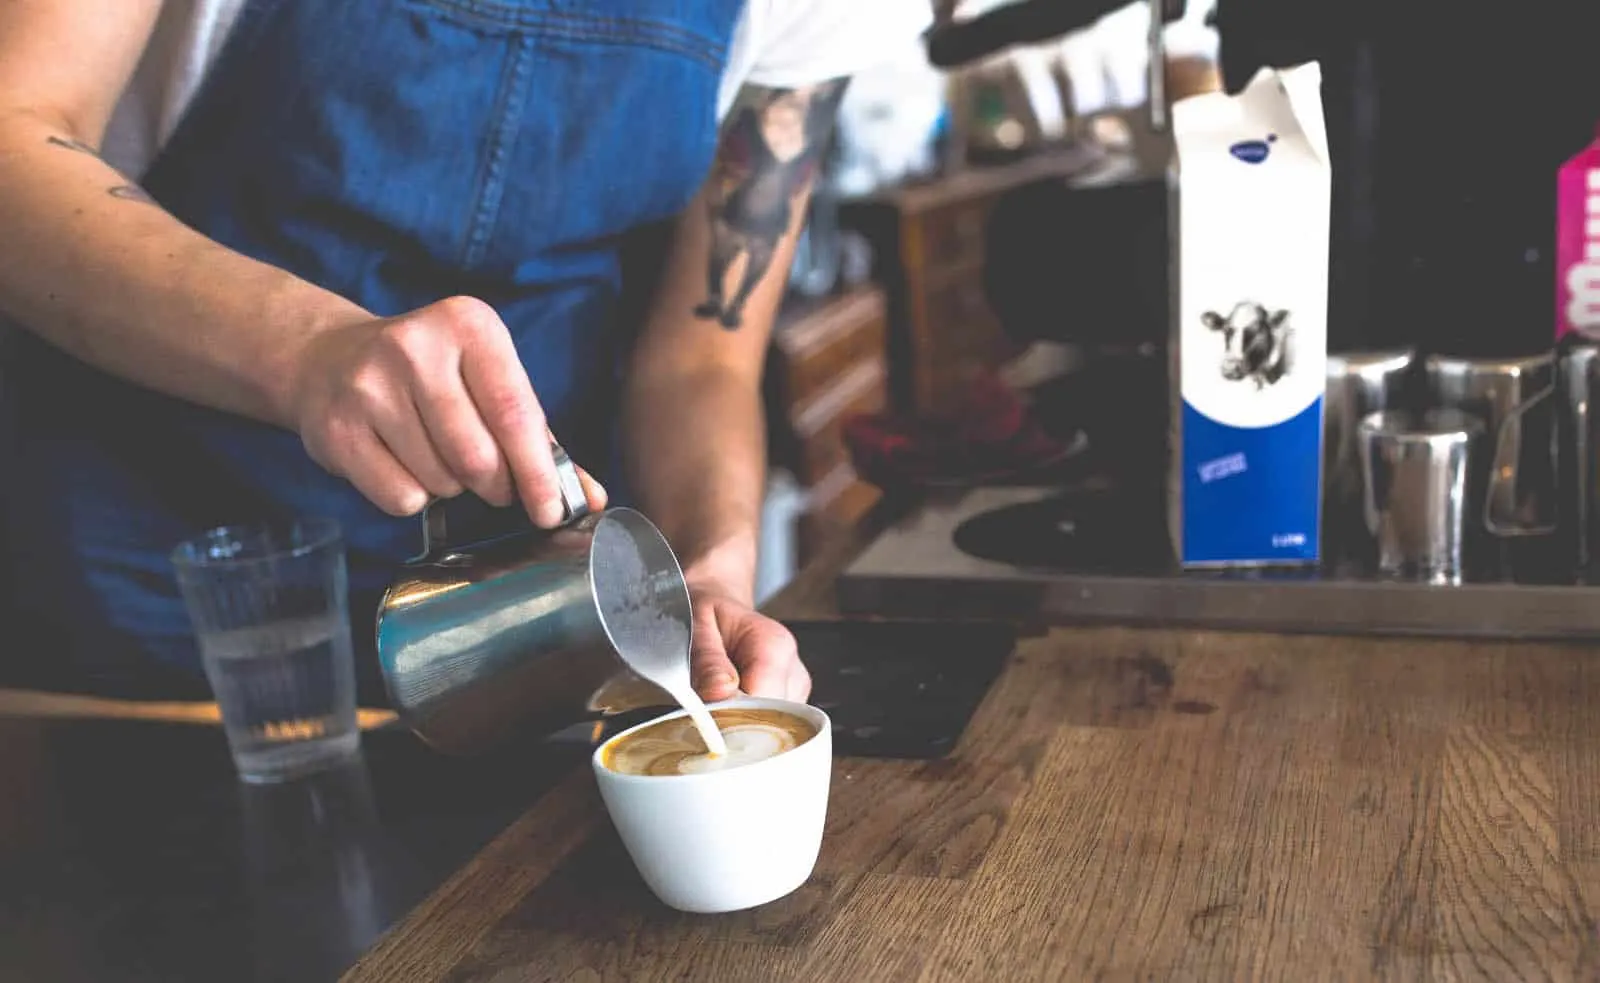 Coffee is life in Australia. Being a barista is one of the most popular jobs in Australia for foreigners.